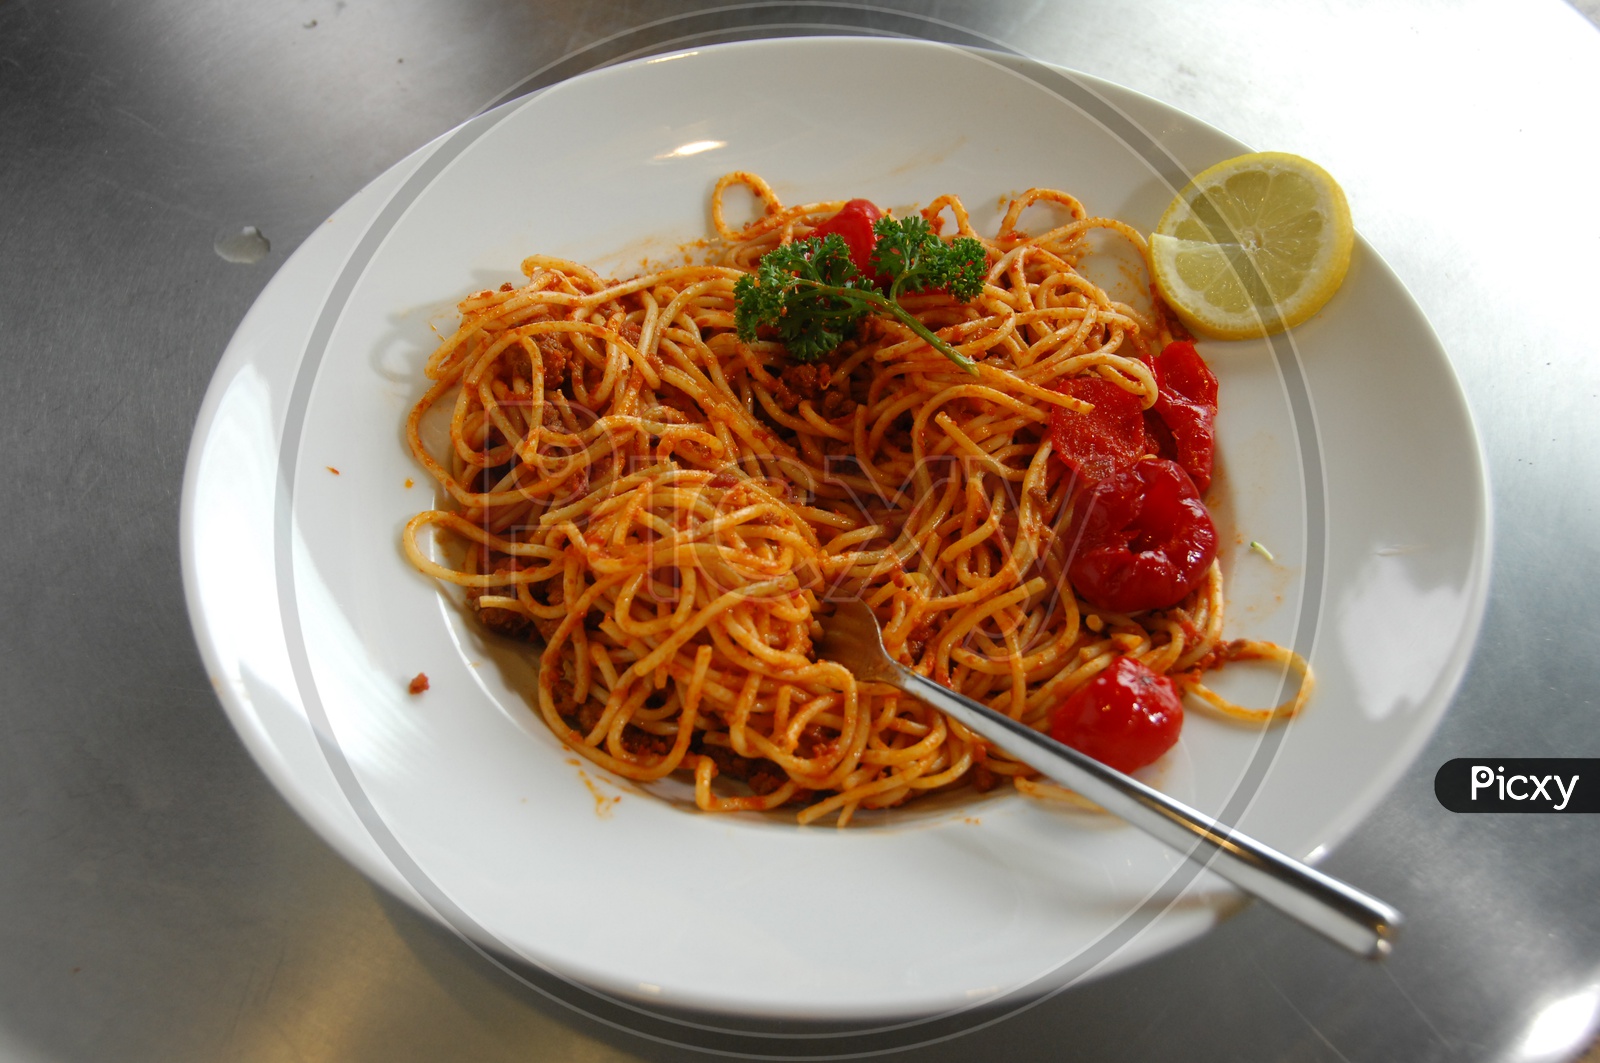 Spicy noodles topped with cherry tomatoes, parsley and a lemon slice served in a white bowl